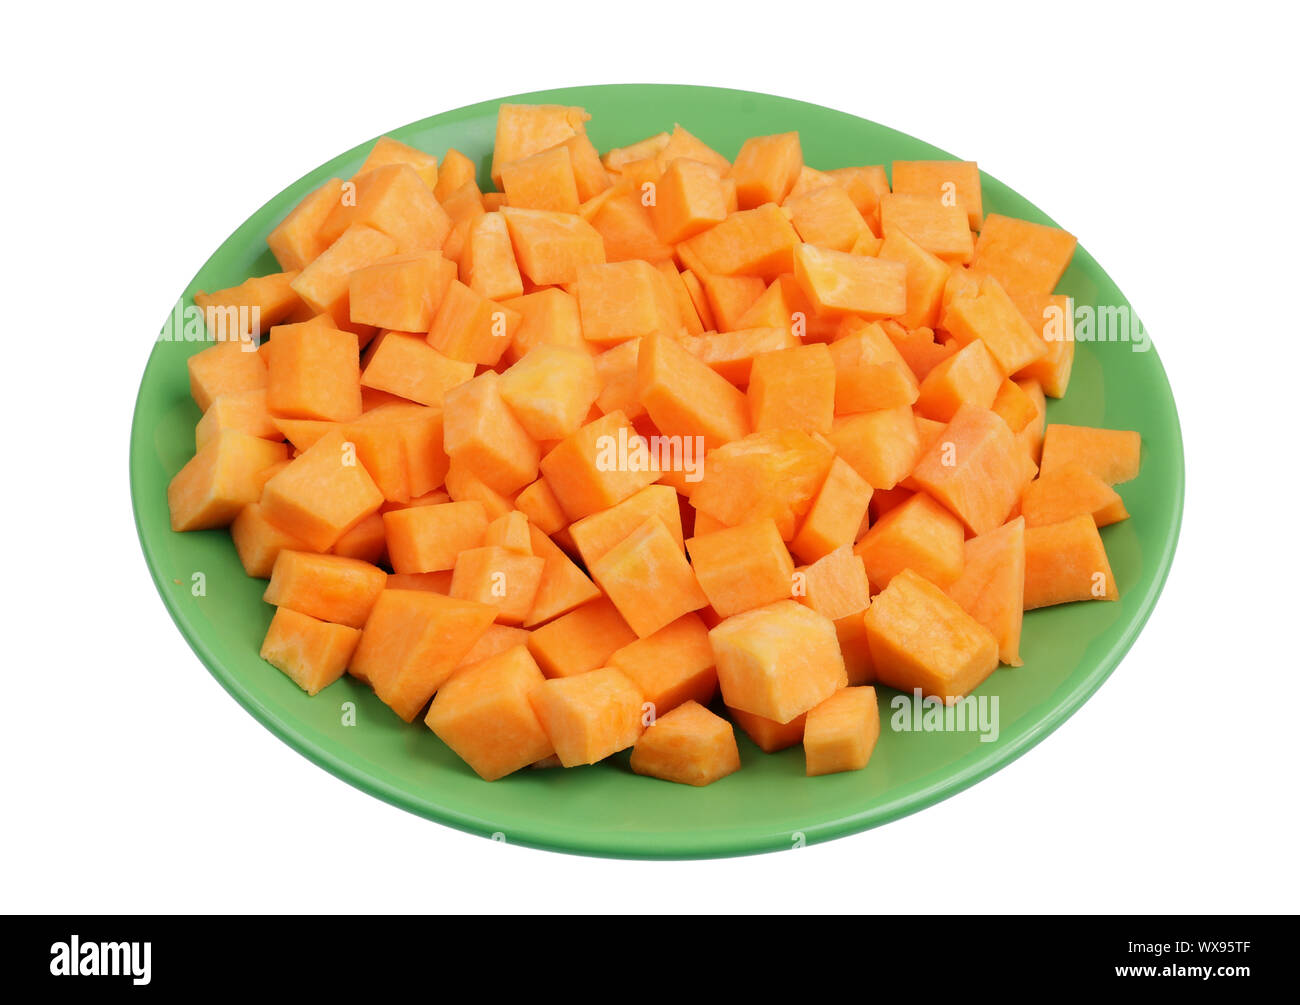 Slices of sweet orange pumpkin on a green plate isolated Stock Photo